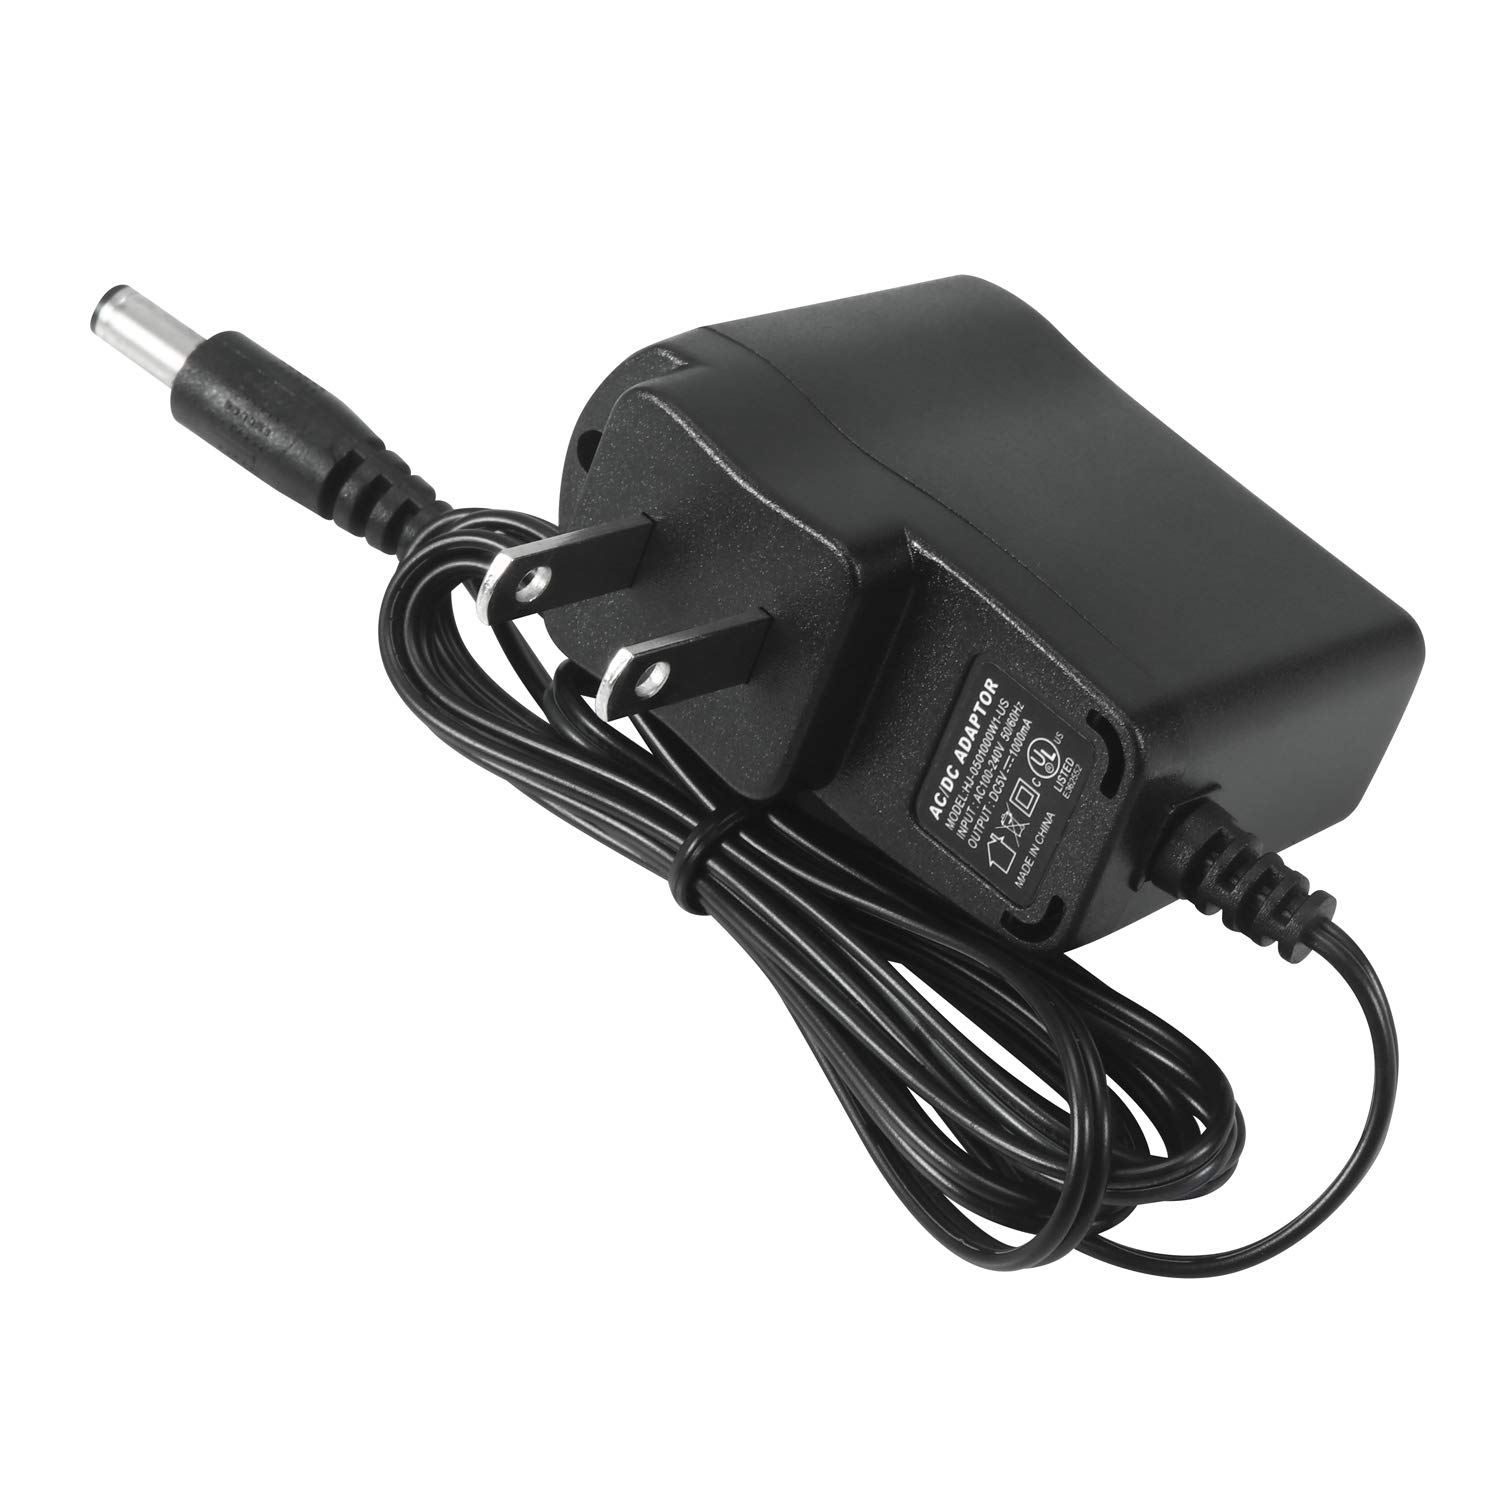 What Is A 5V Adapter